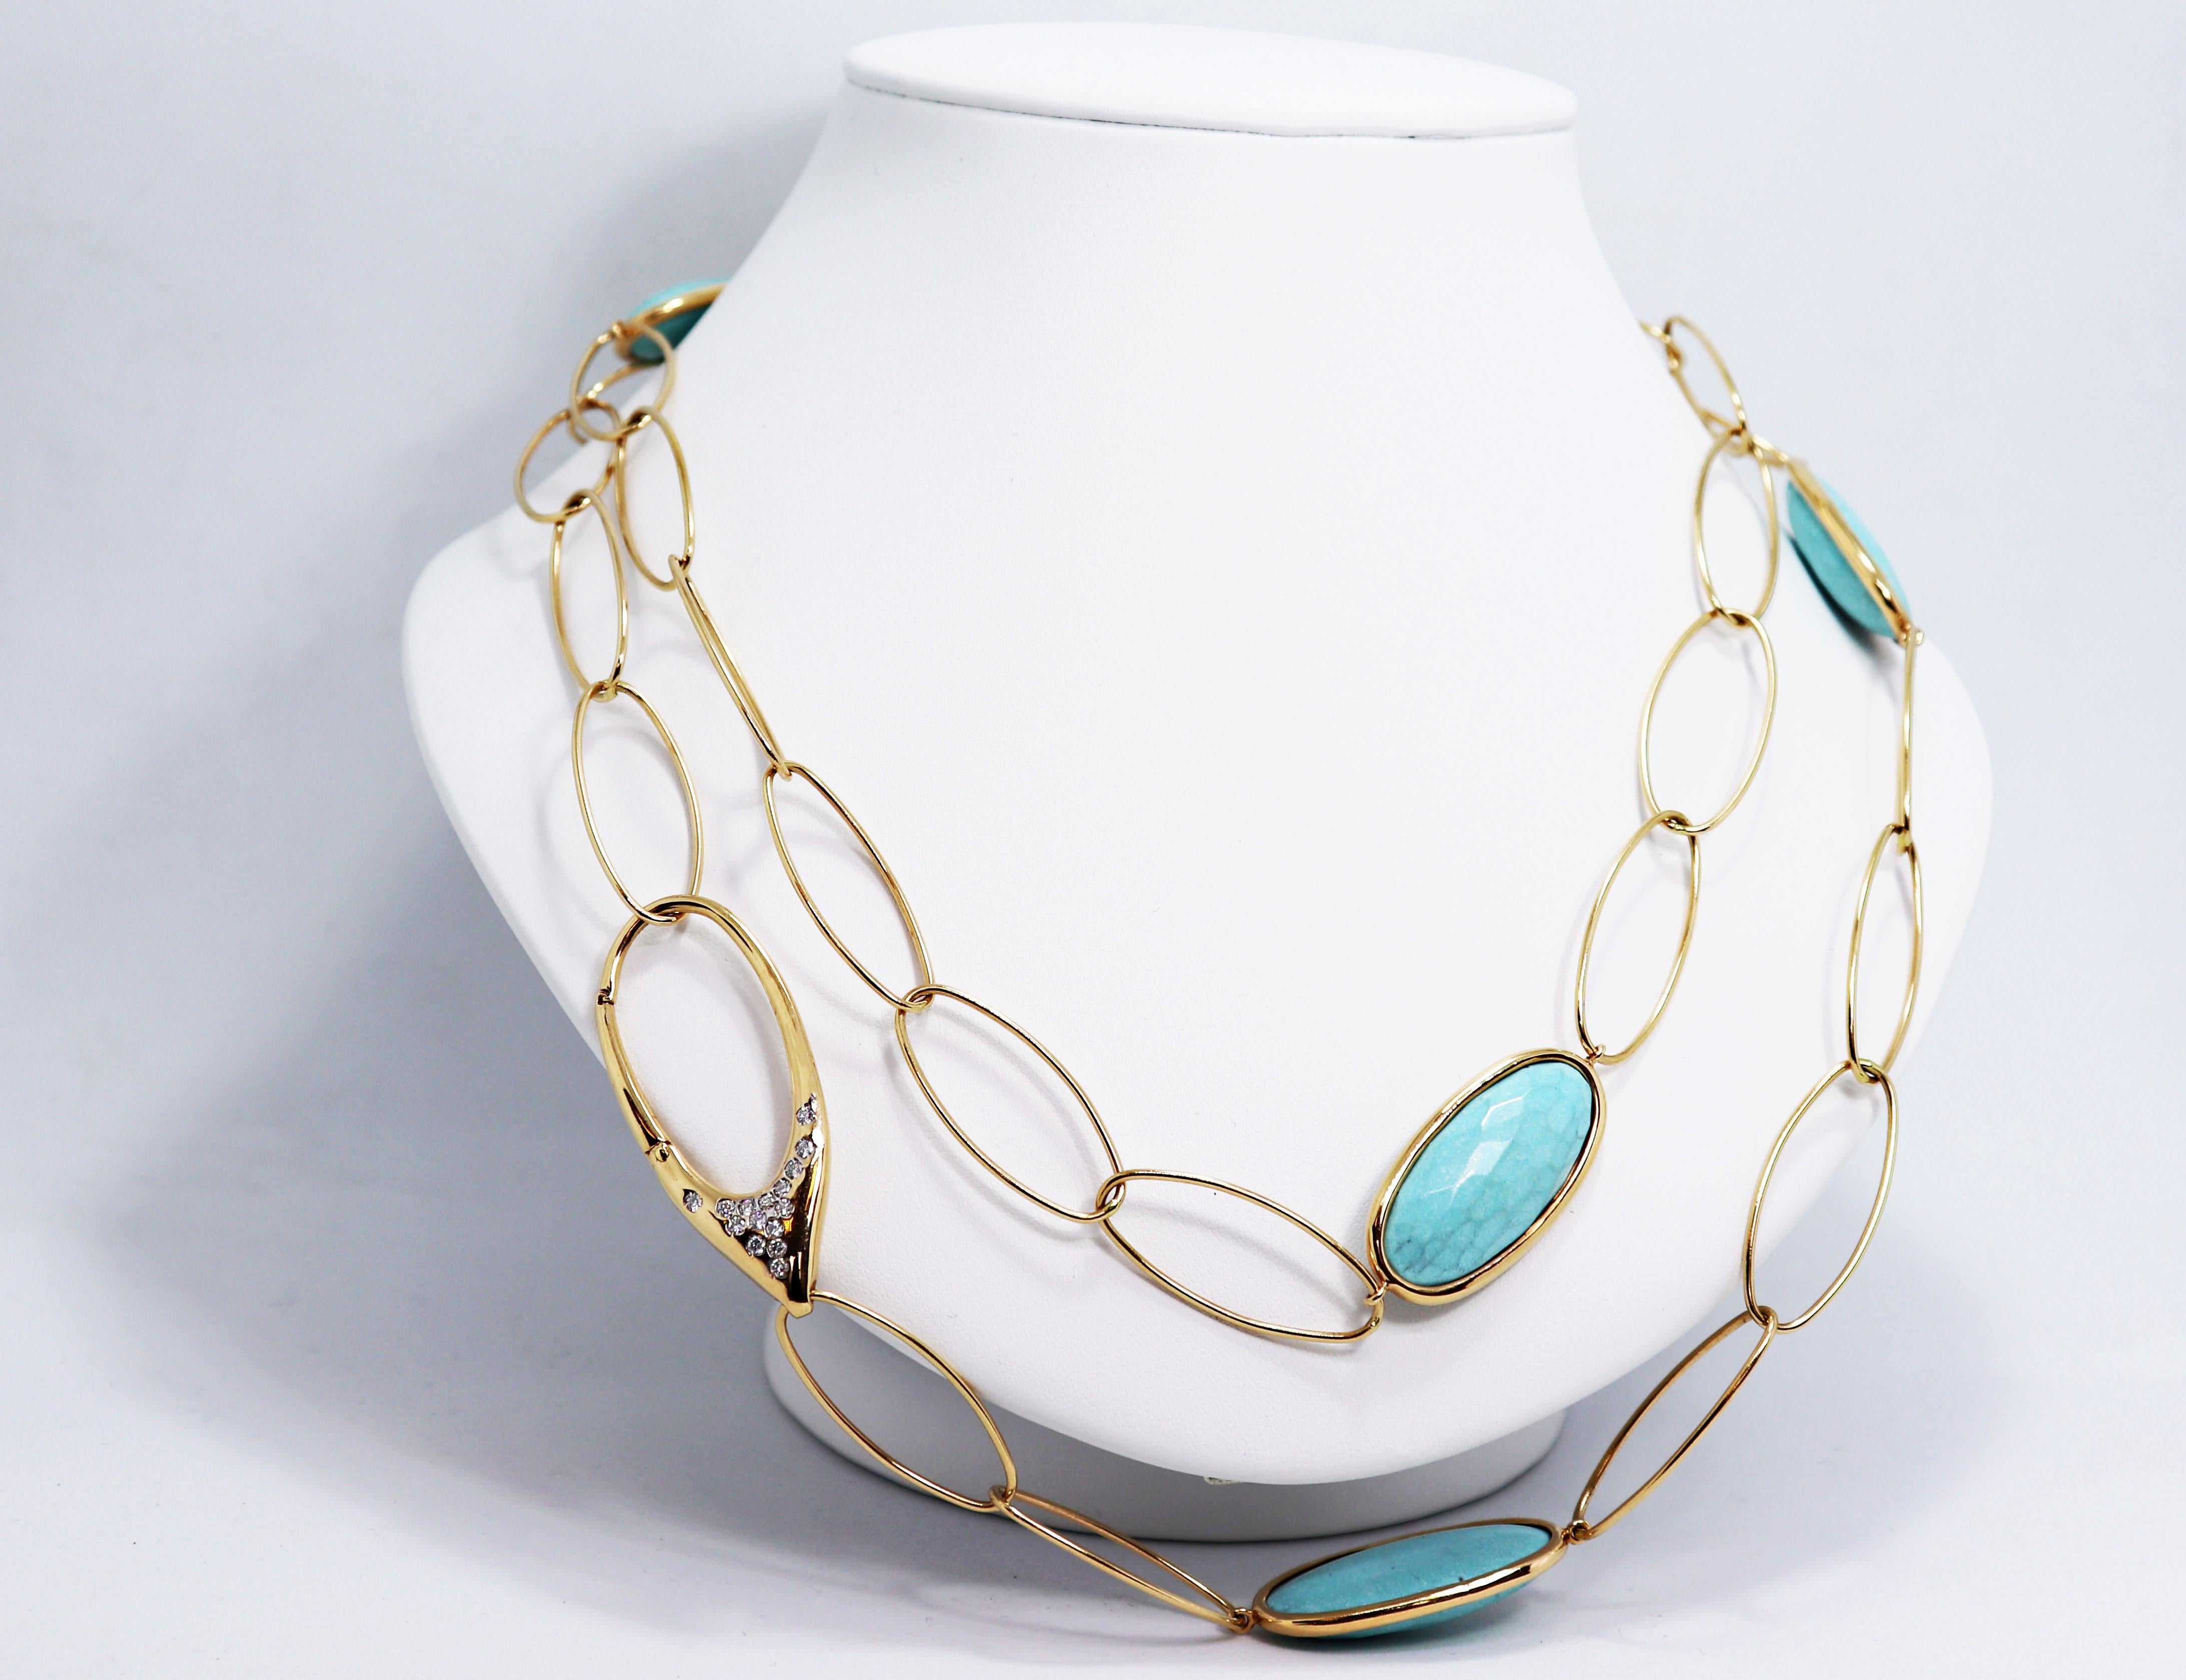 Beautiful fancy link chain set with four oval shaped  cabouchon turquoise stones, rub-over set in 18ct yellow gold. The chain is beautifully finished with an 18ct gold hinged clasp set with 30 round brilliant cut diamonds. The chain measures 40